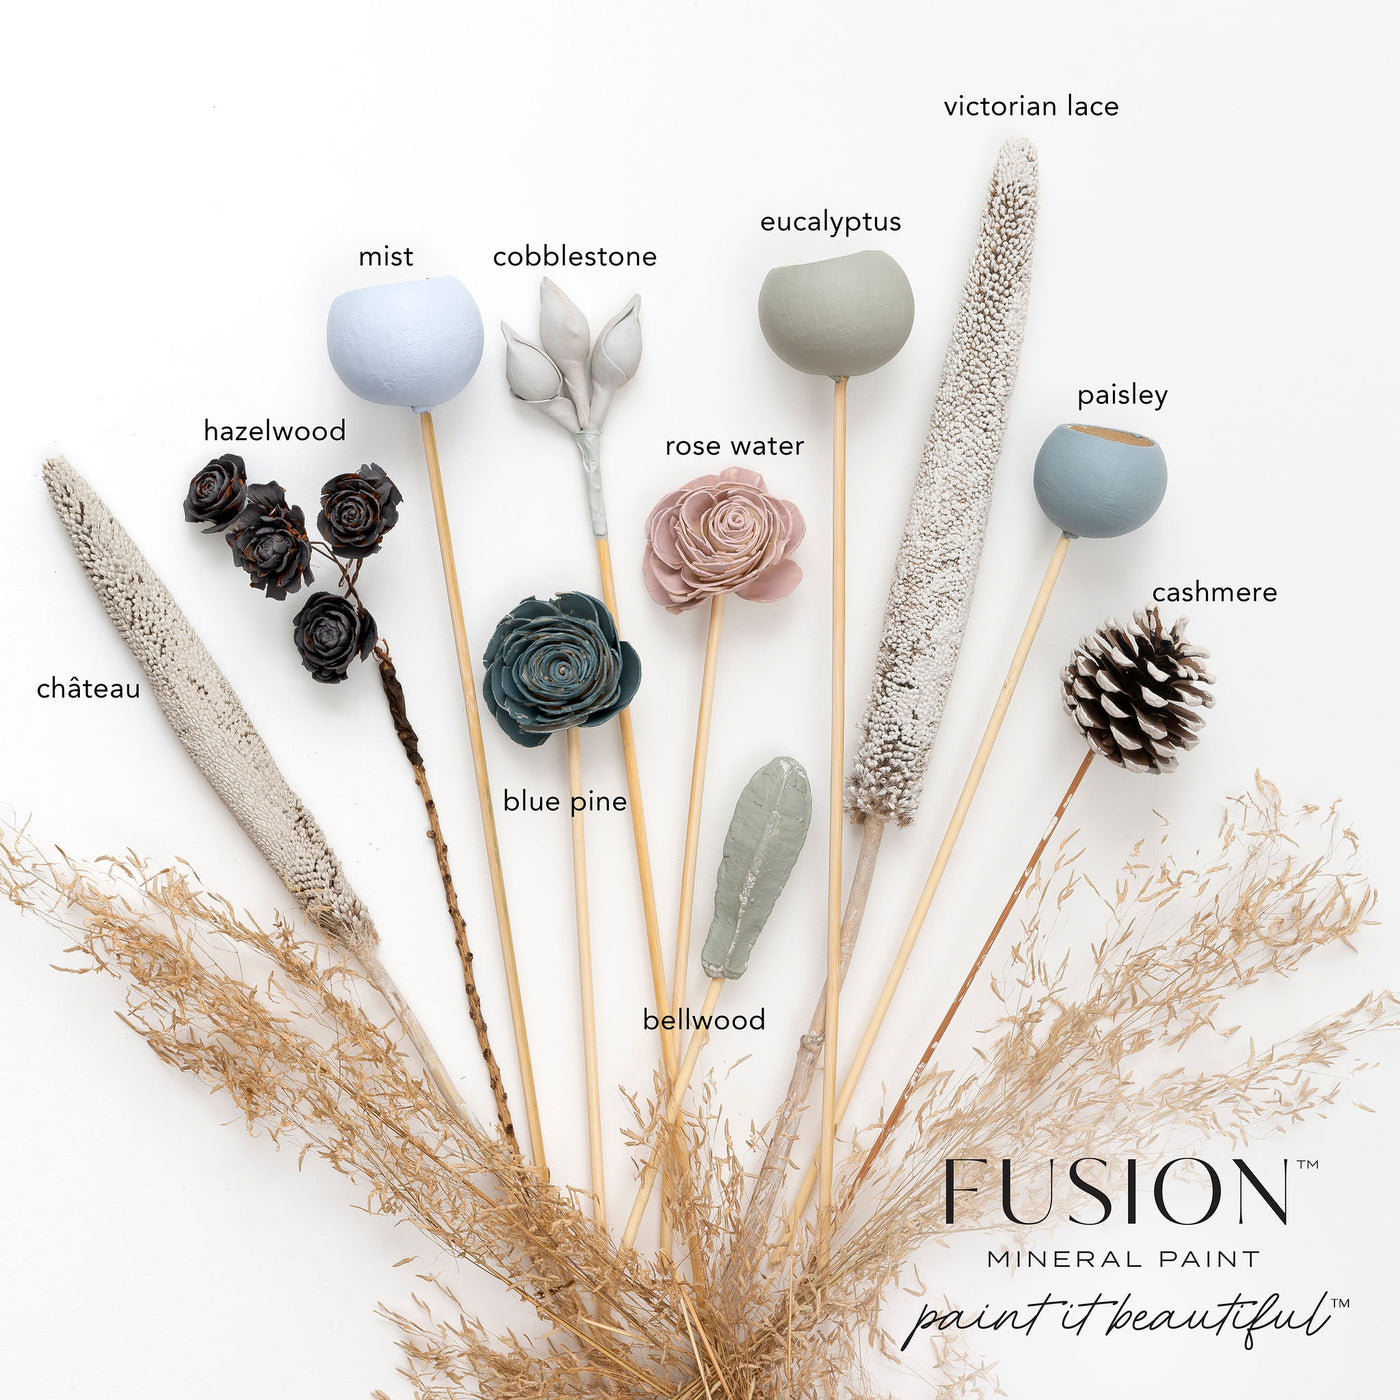 Fusion Mineral Paint - Victorian Lace from the new colour